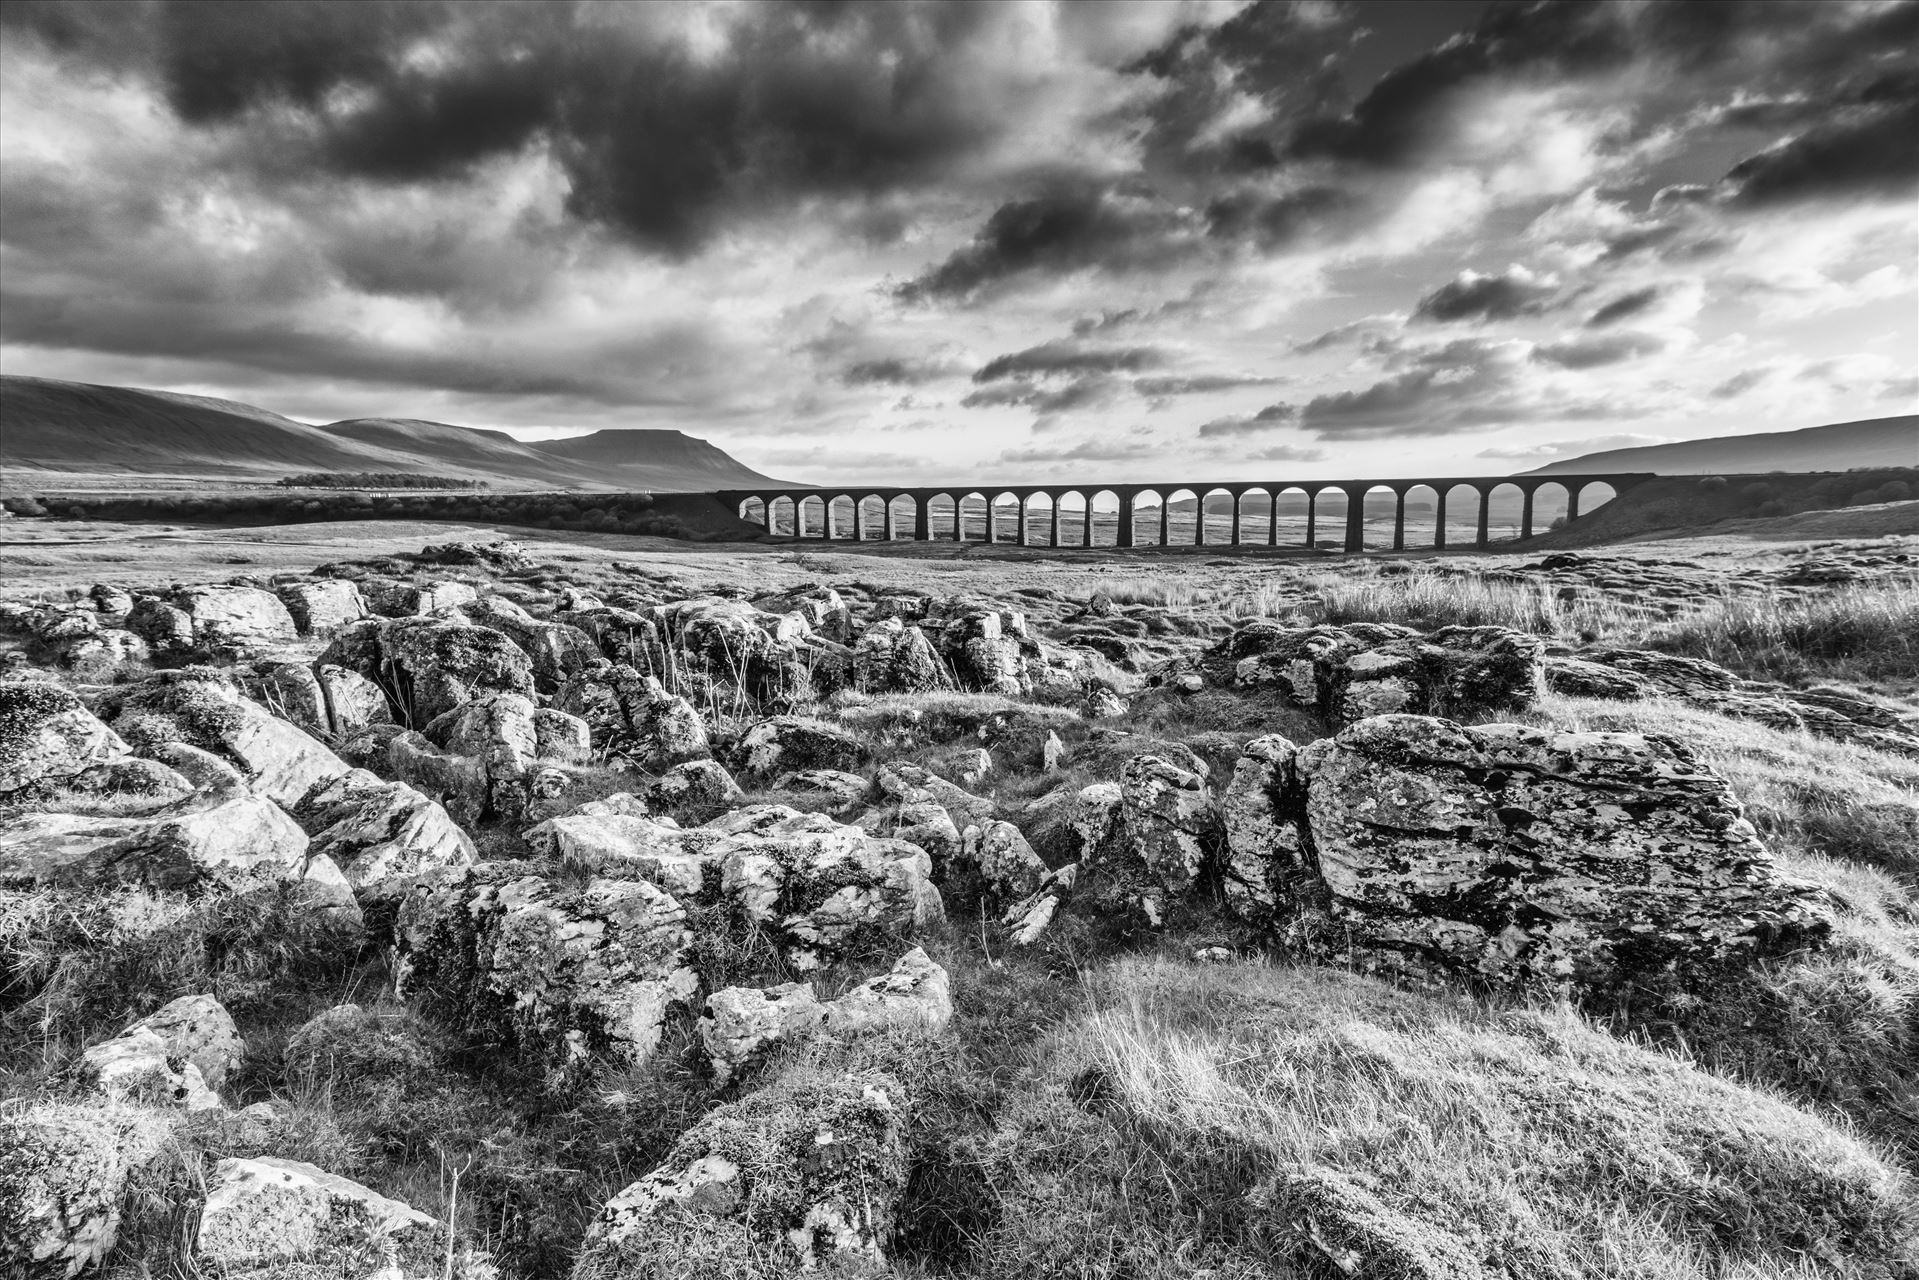 Ribblehead Viaduct 4 The Ribblehead Viaduct in the Yorkshire Dales. It's main purpose is as part of the Settle to Carlisle railway carrying famous trains like the Flying Scotsman. by Tony Keogh Photography